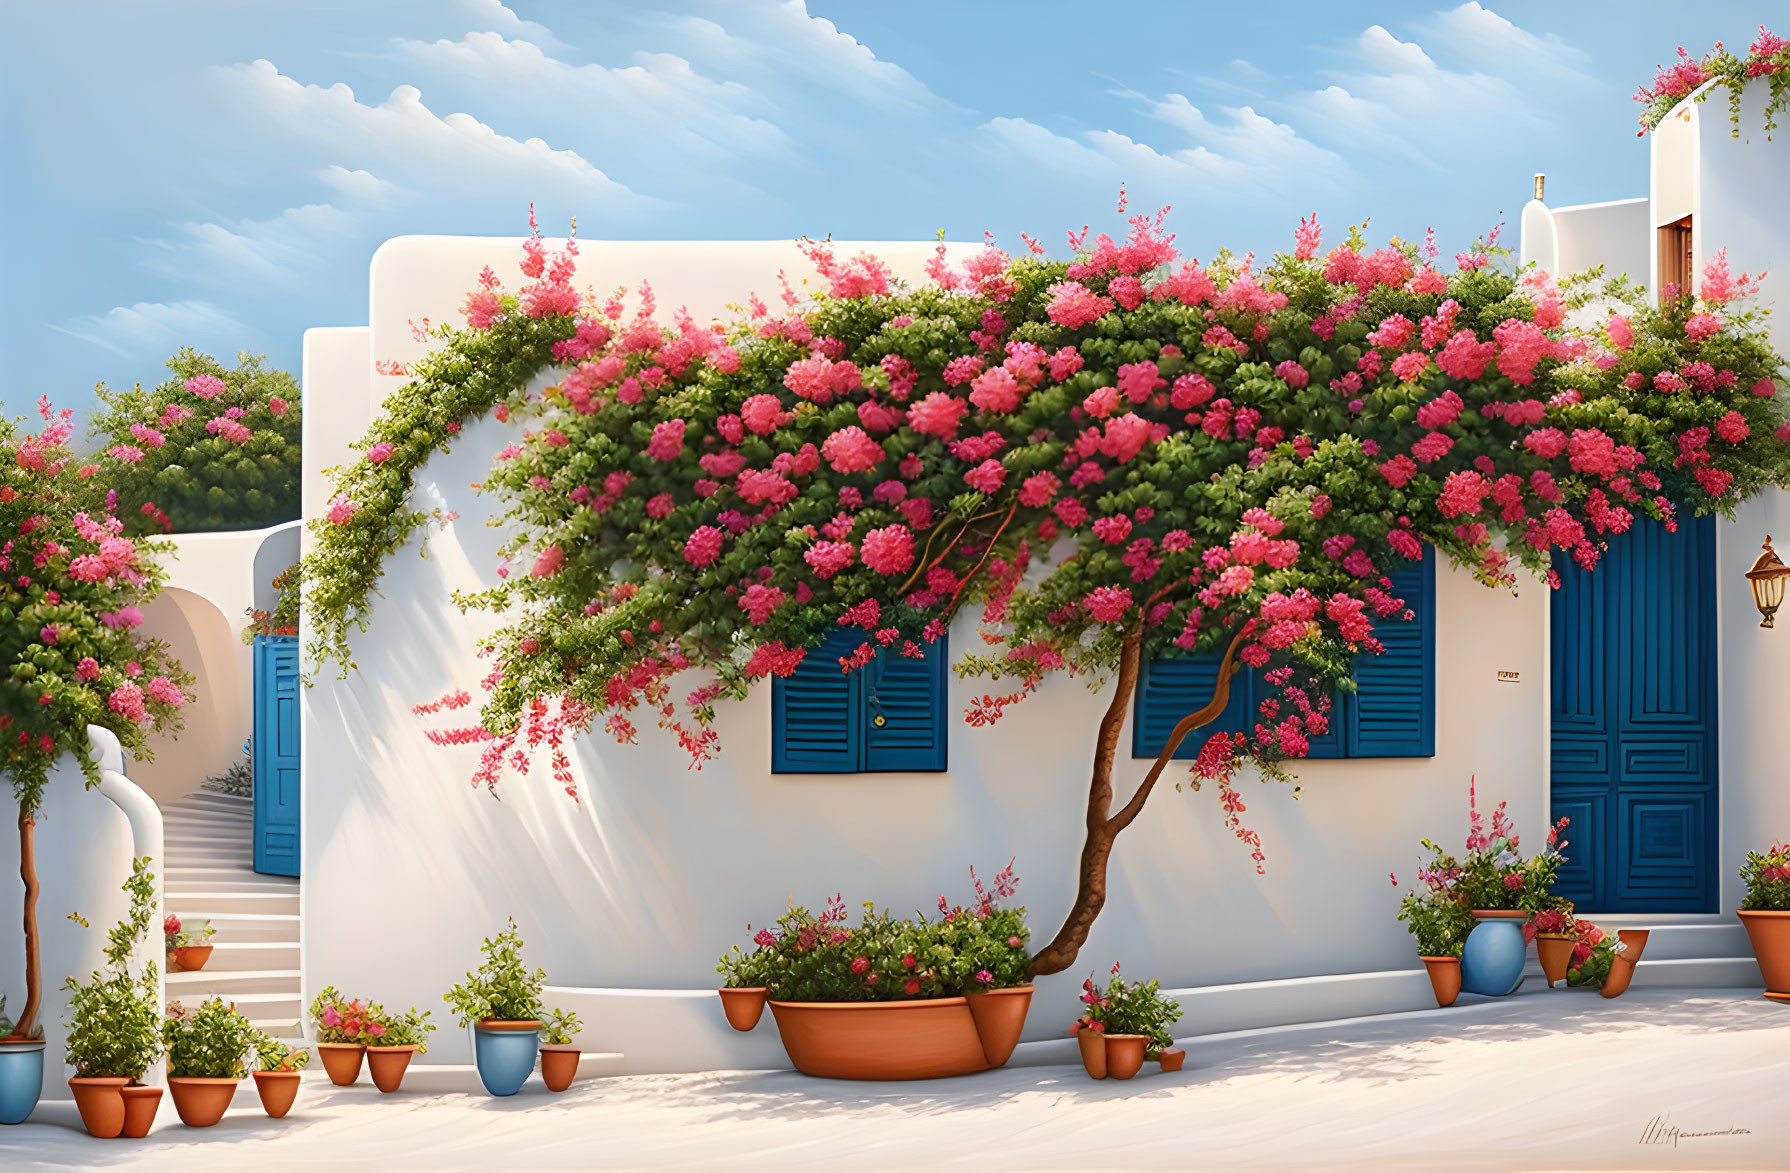 White Building with Blue Doors and Pink Bougainvillea Under Blue Sky